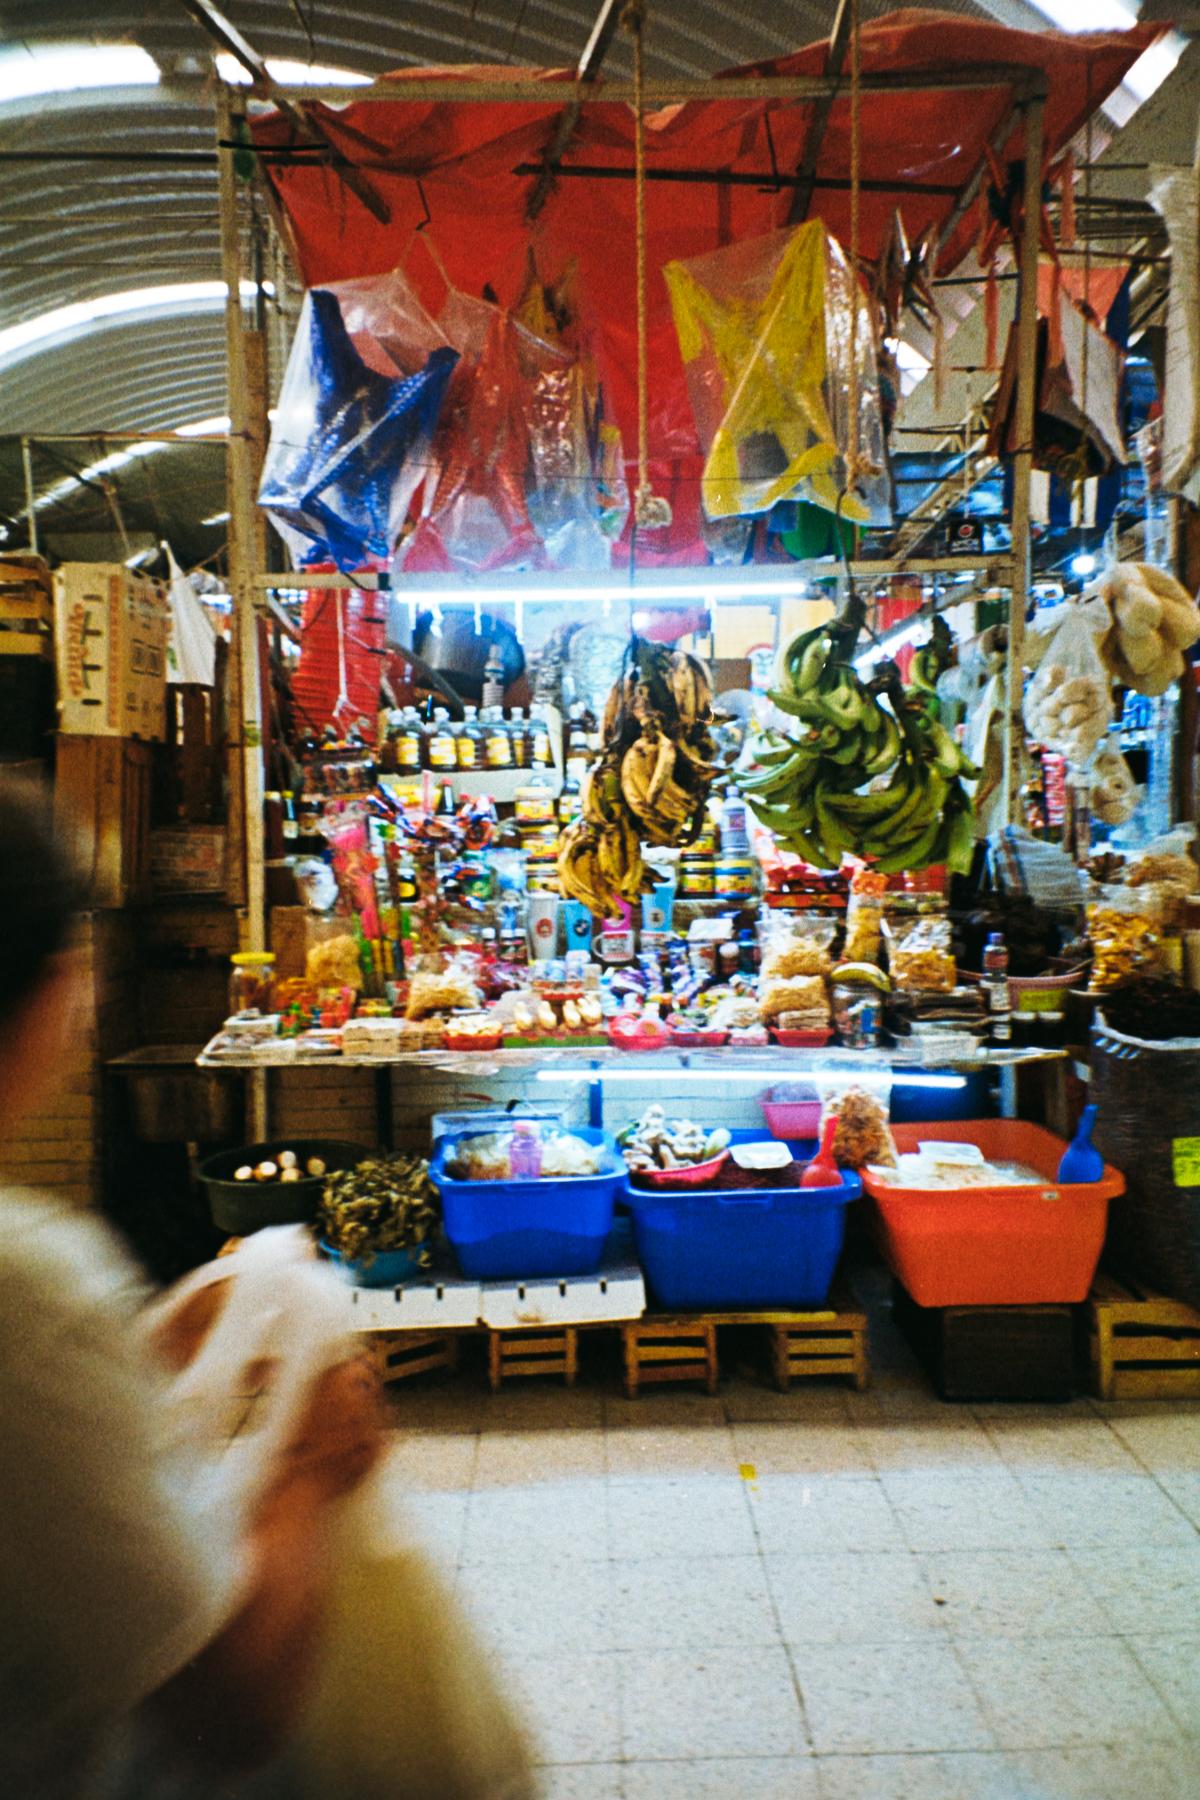 analog street photograph of a food market stand in Mexico City